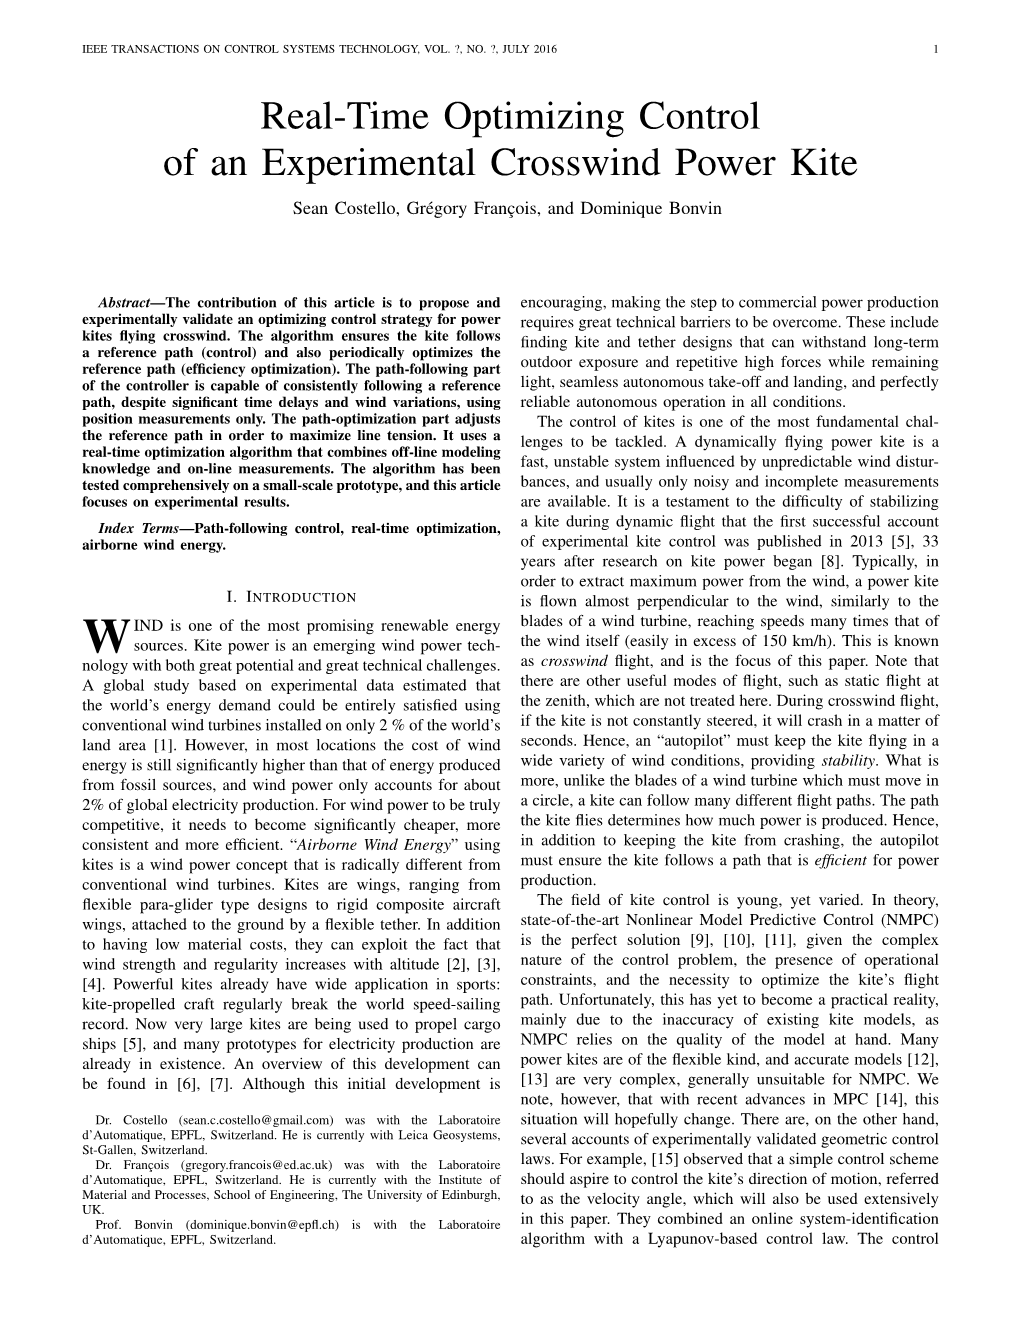 Real-Time Optimizing Control of an Experimental Crosswind Power Kite Sean Costello, Gregory´ Franc¸Ois, and Dominique Bonvin